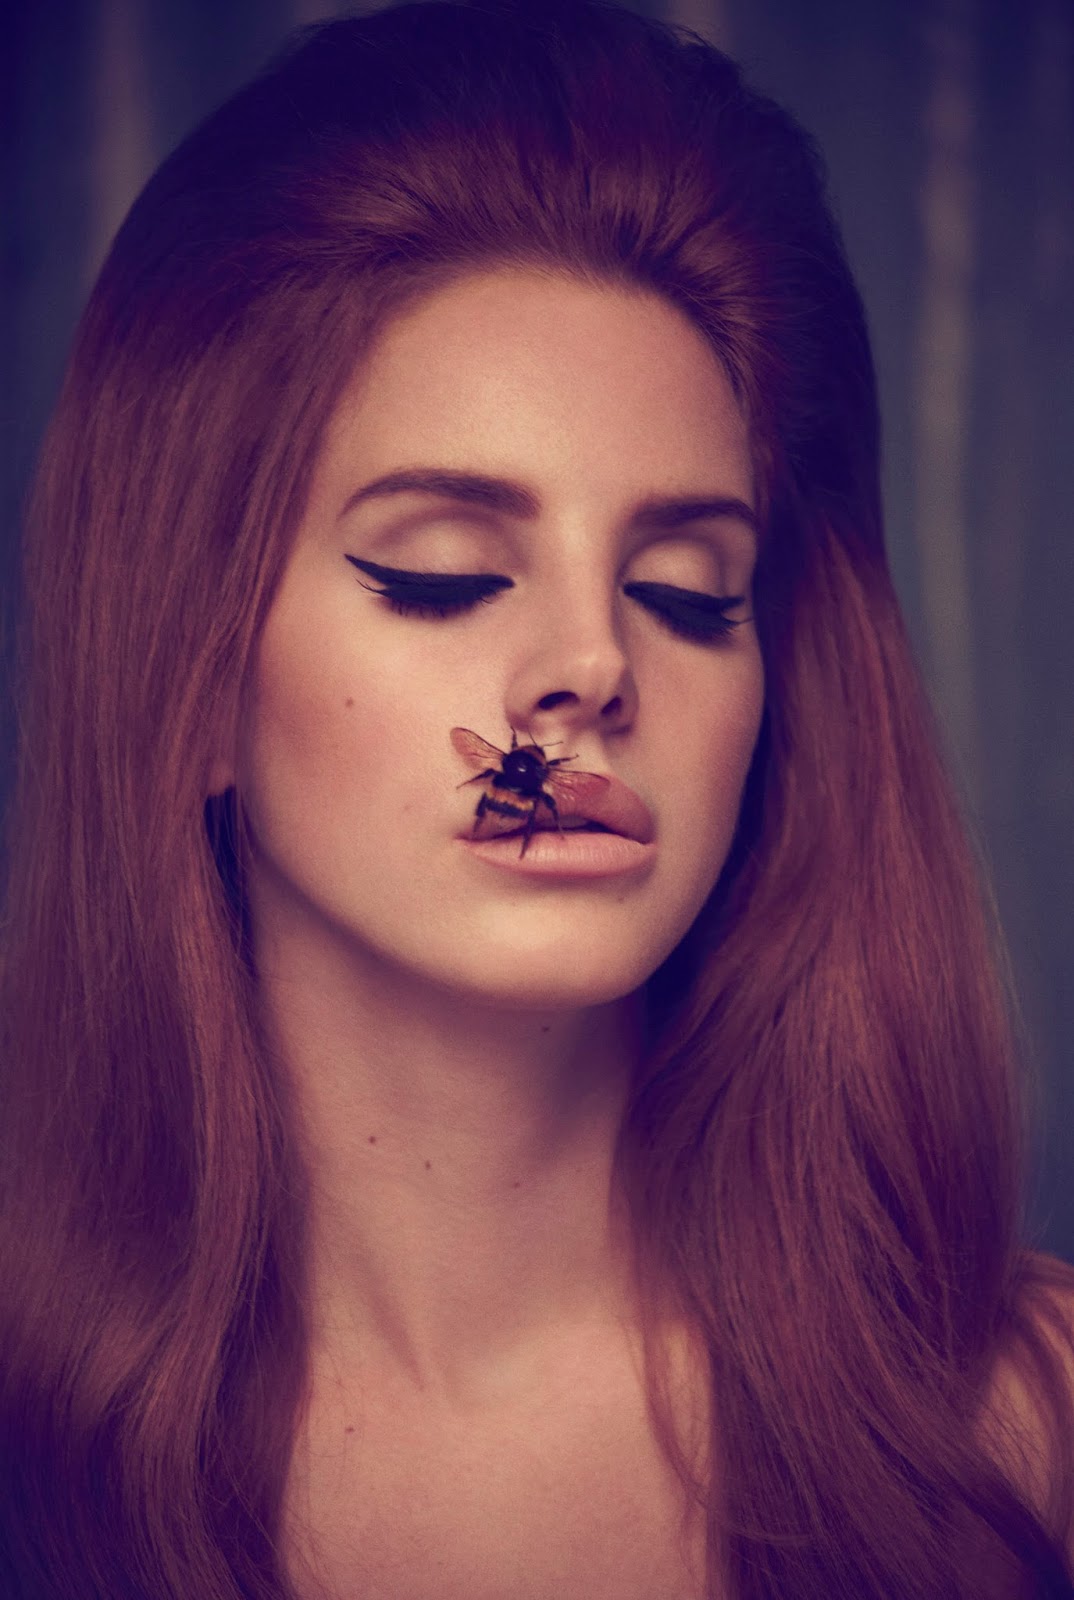 loveisspeed.......: LANA DEL REY from INTERVIEW RUSSIA FEBRUARY 2012 ...